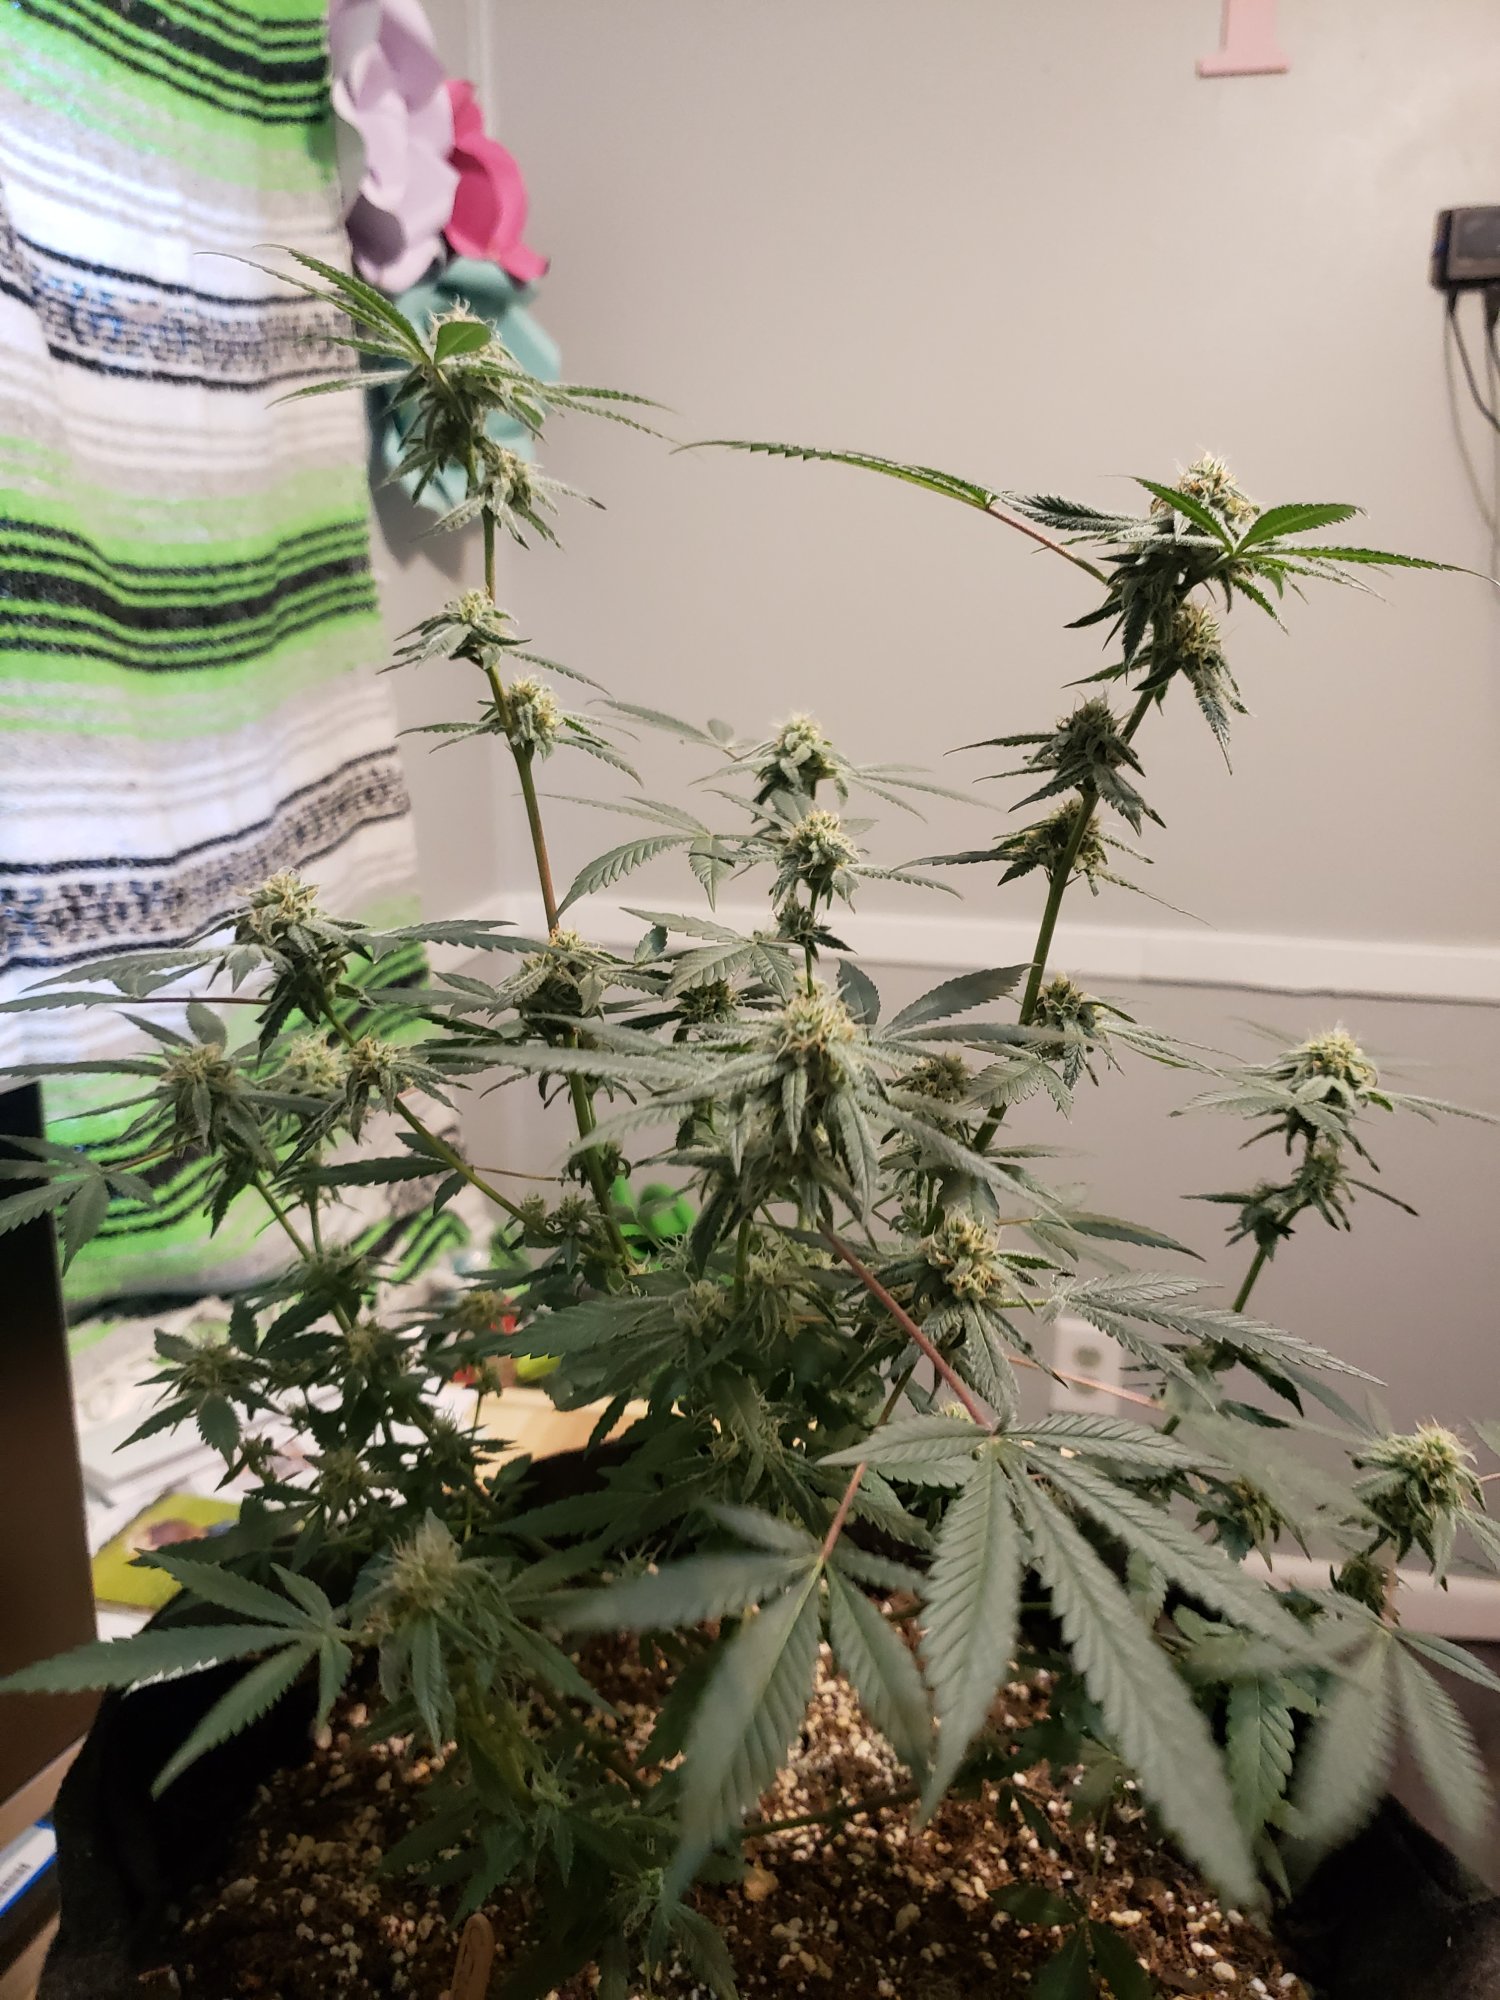 First grow month into flower 3